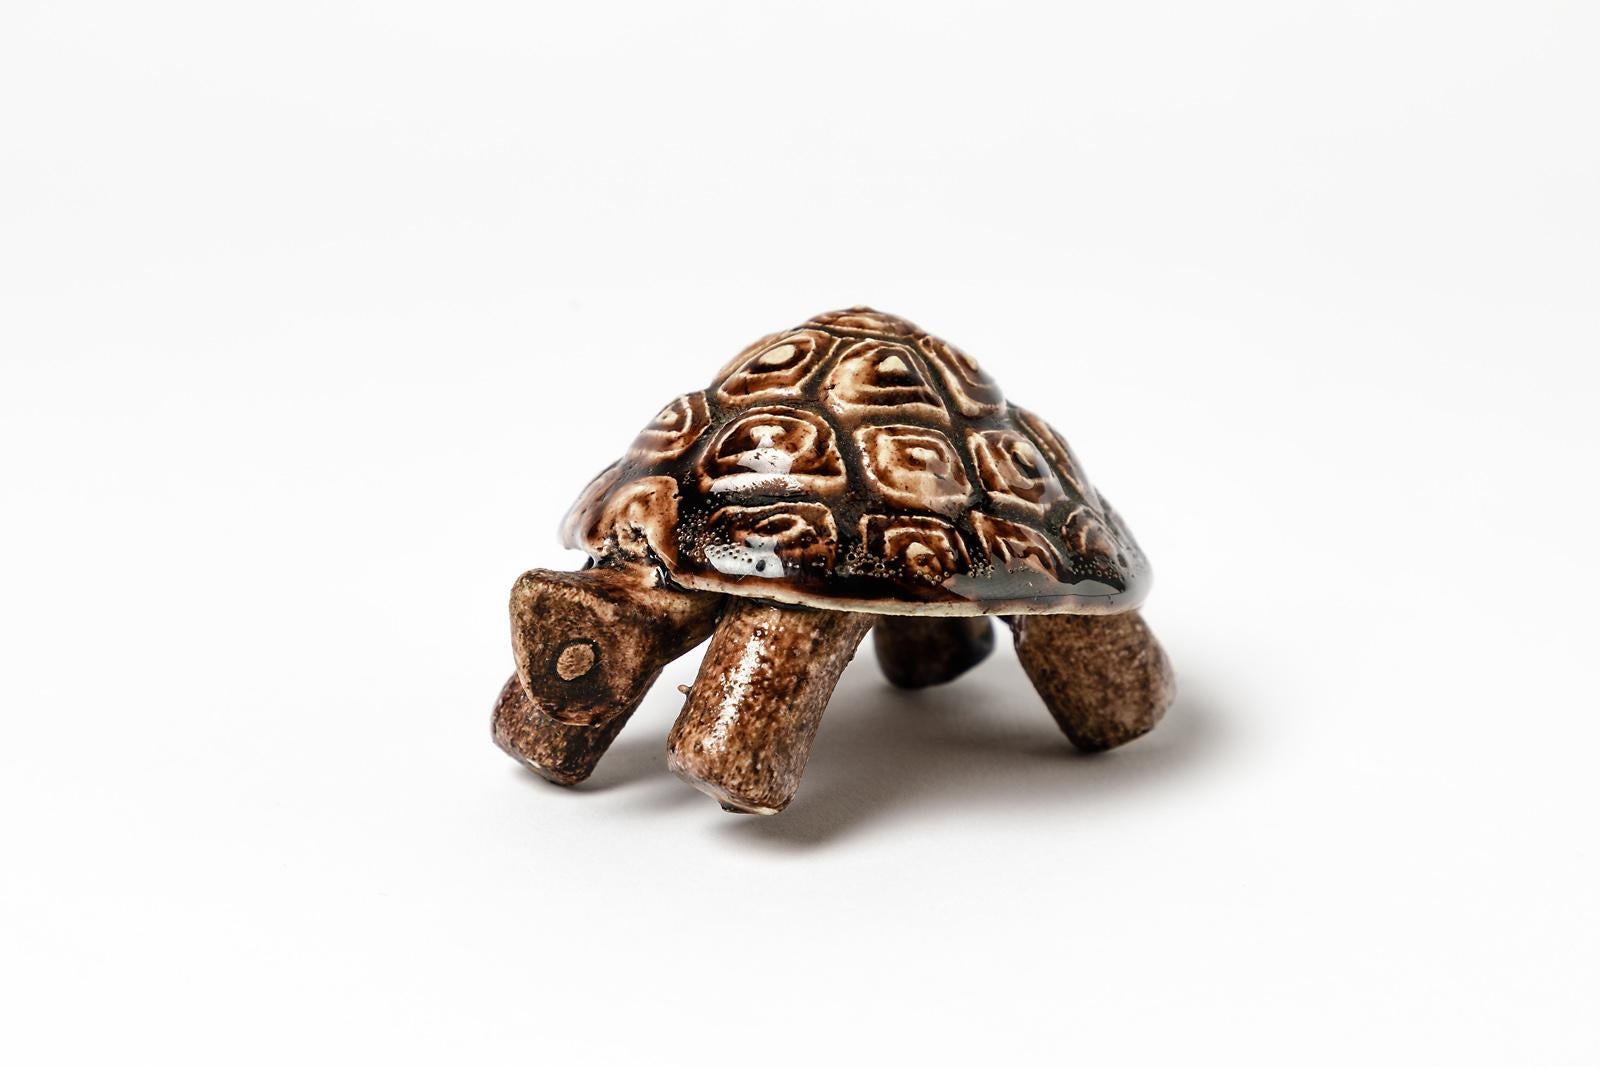 Accolay

Animal ceramic sculpture by French ceramist of accolay.

Tortoise form with brown pottery color.

Signed under the base

Dimensions: 6 x 10cm.